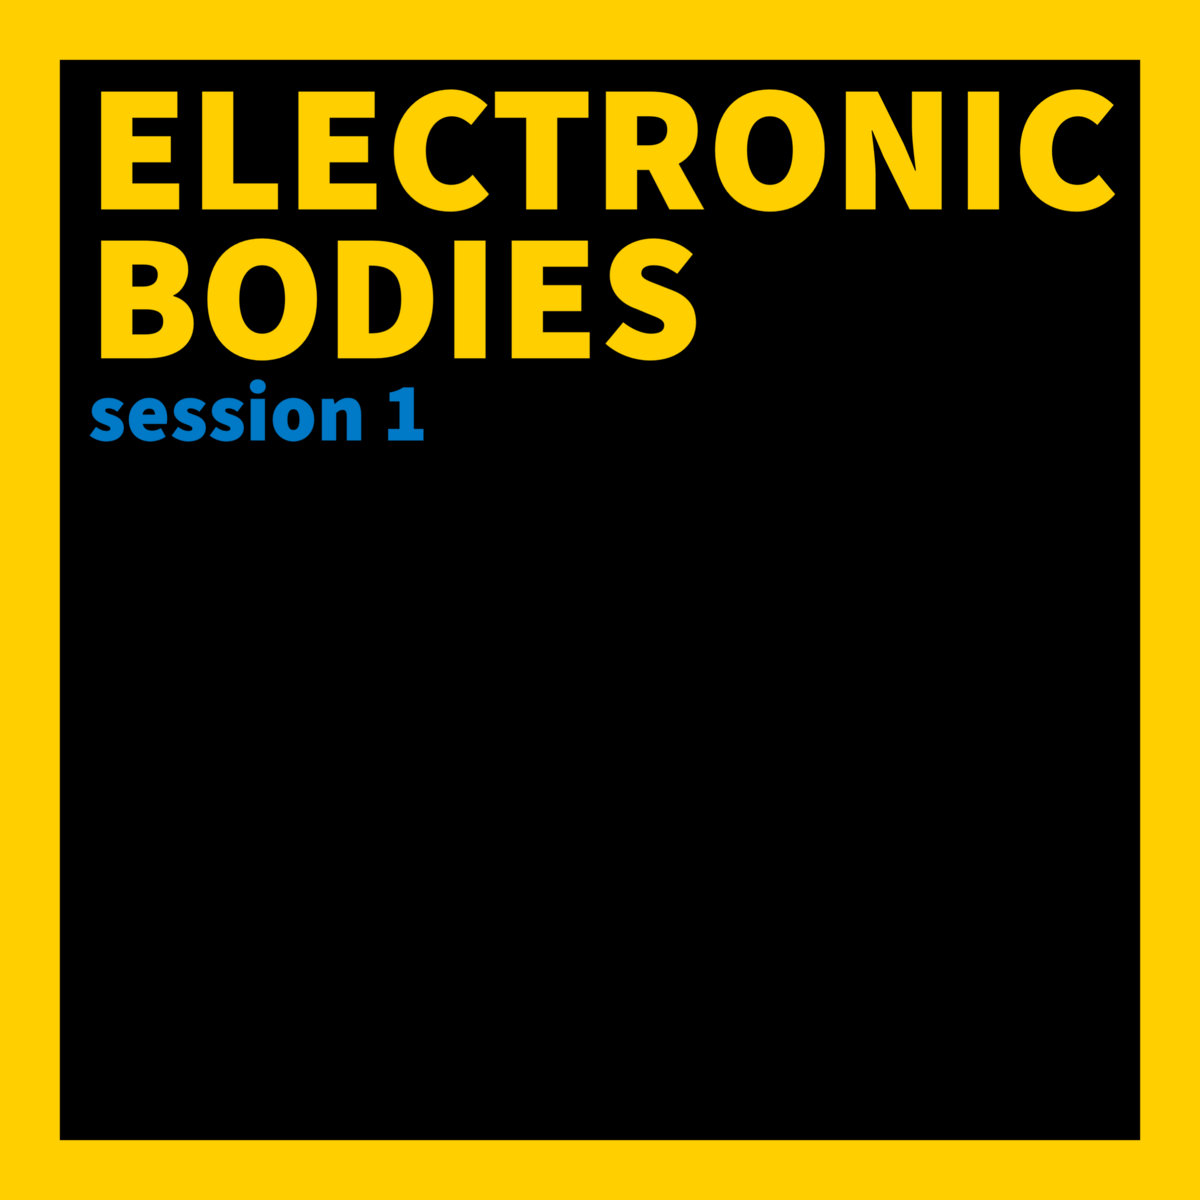 Available now from Bandcamp is our brand new 88-track strong charity compilation 'Electronic Bodies': sidelinemag.bandcamp.com/album/electron… This collection dives deep into the rhythms of #EBM (Electronic Body Music), #NewBeat, and their contemporary offshoots. Our commitment to showcasing a…